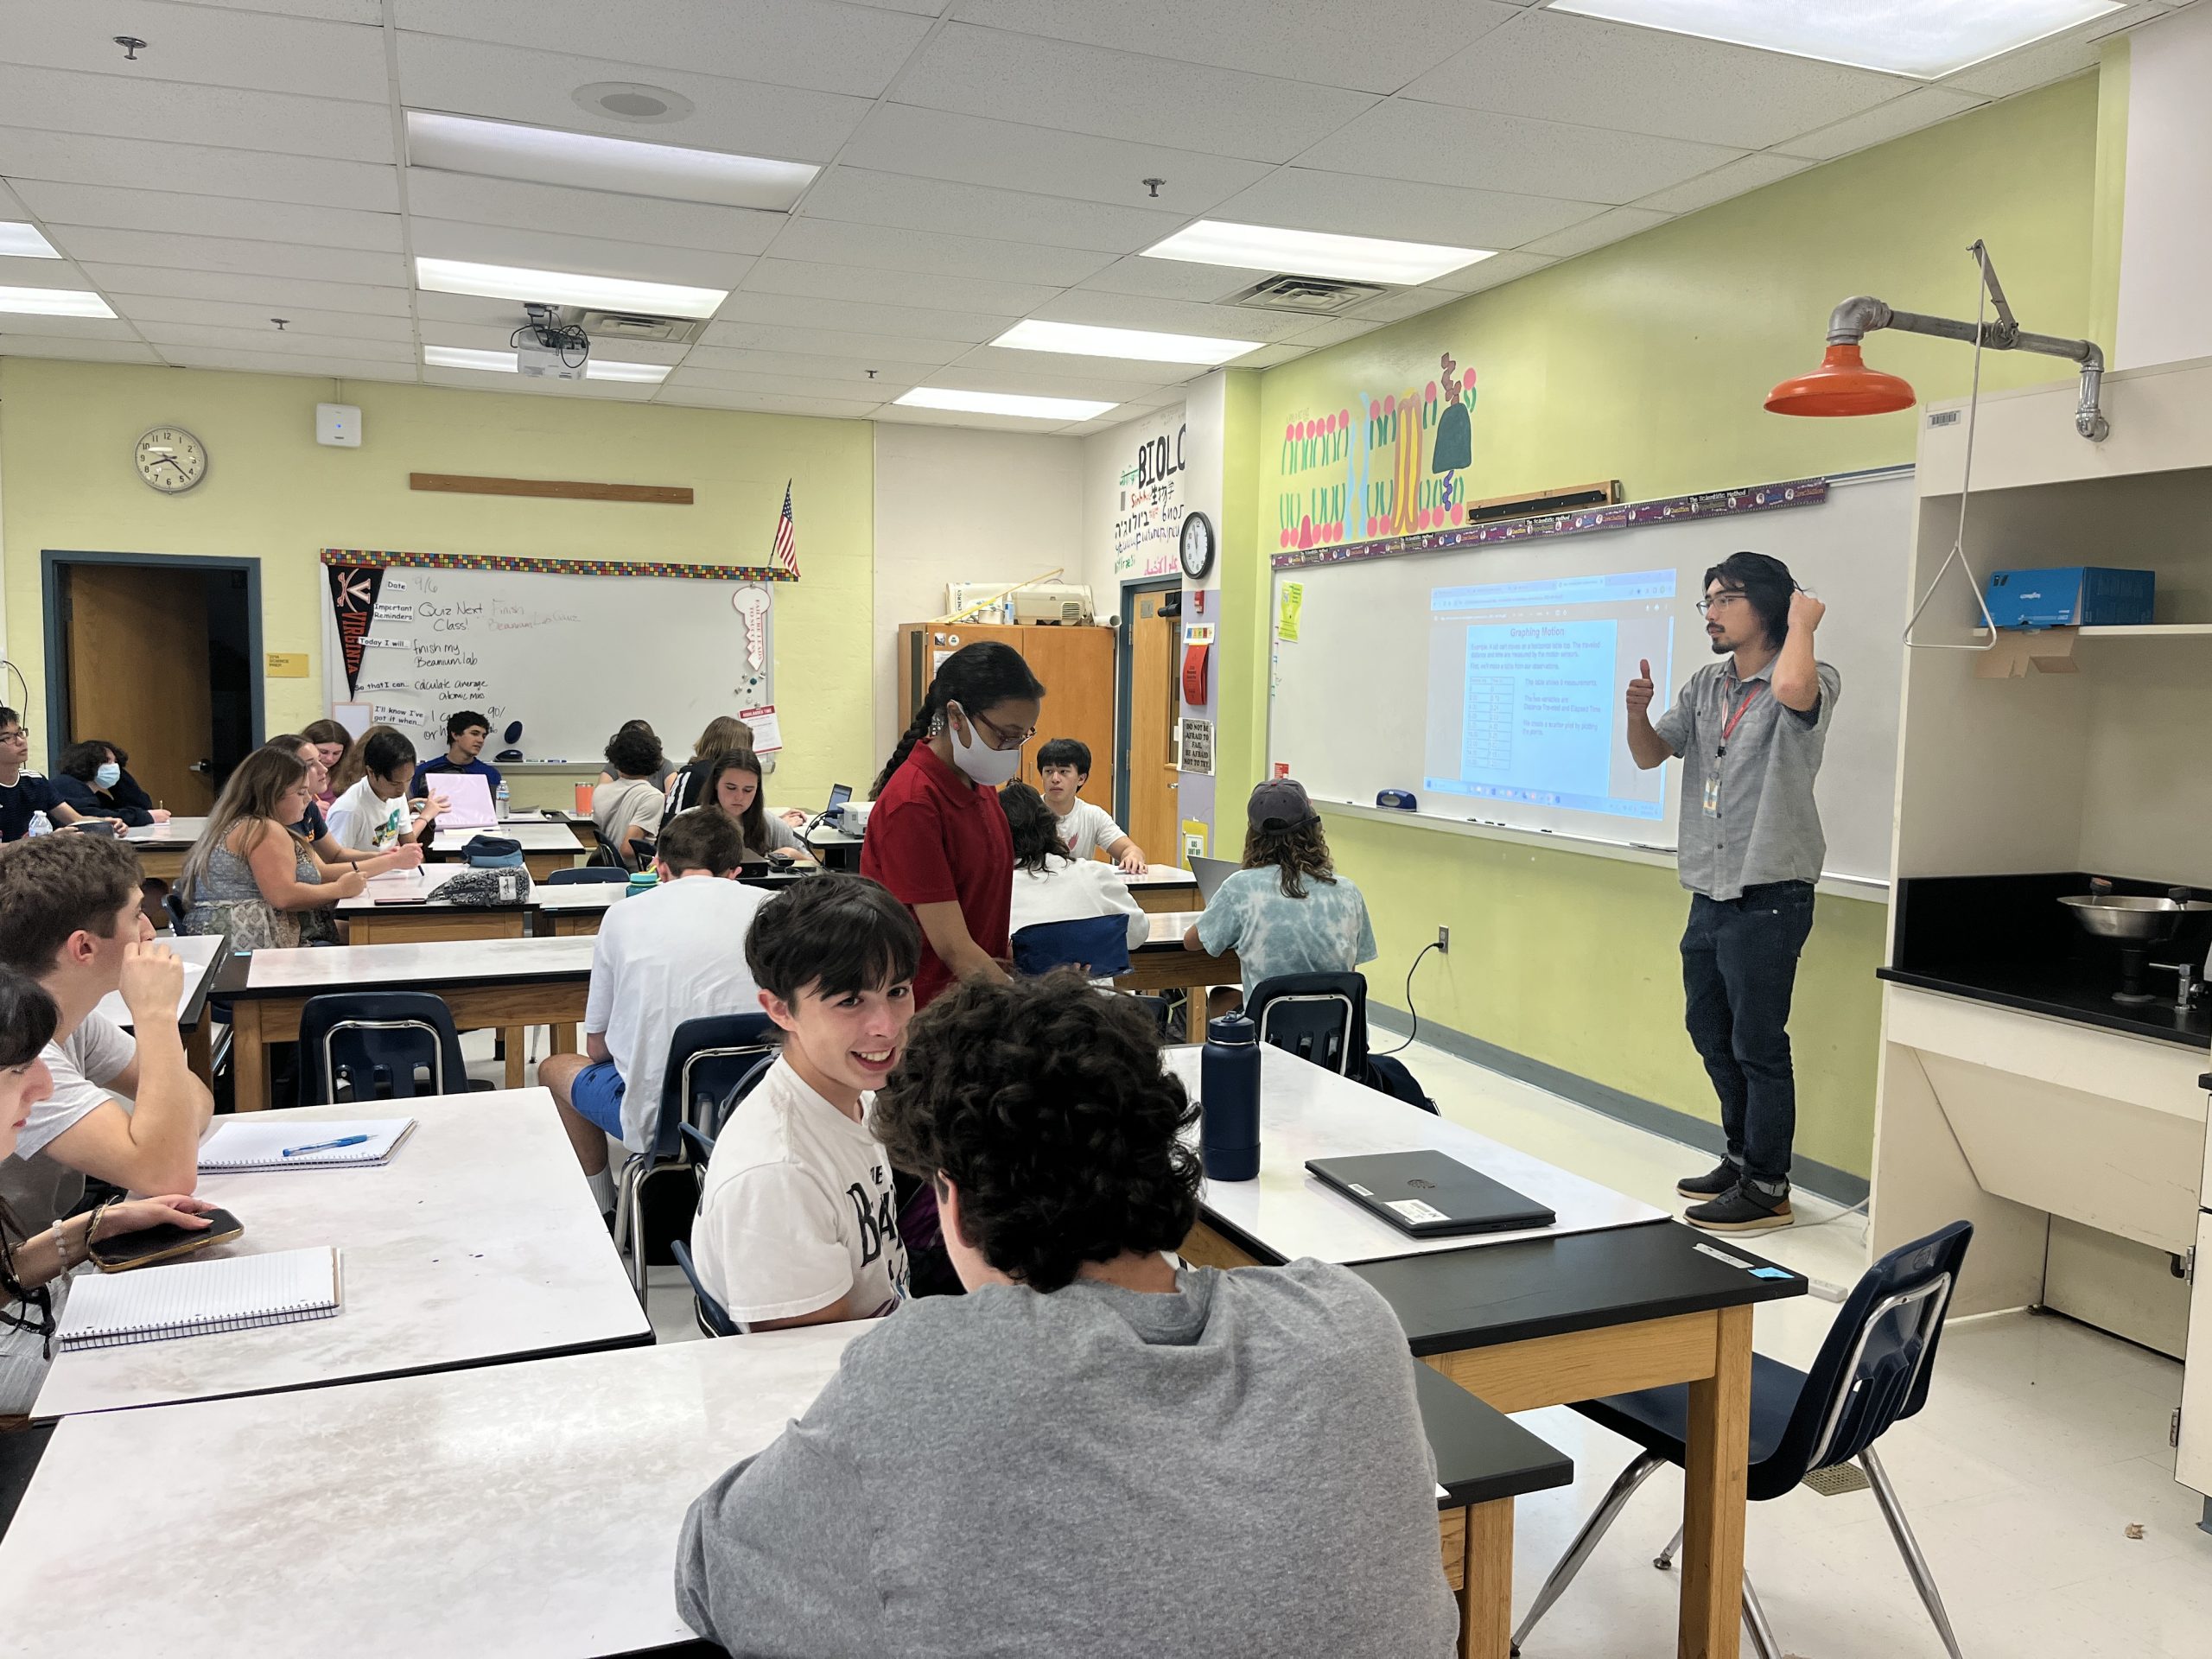 New physics teacher Joseph Kin explains the warm up for his Physics 1 class. Kin frequently uses math-focused warm-ups in class, using review of past material to make the learning of new physics concepts easier.